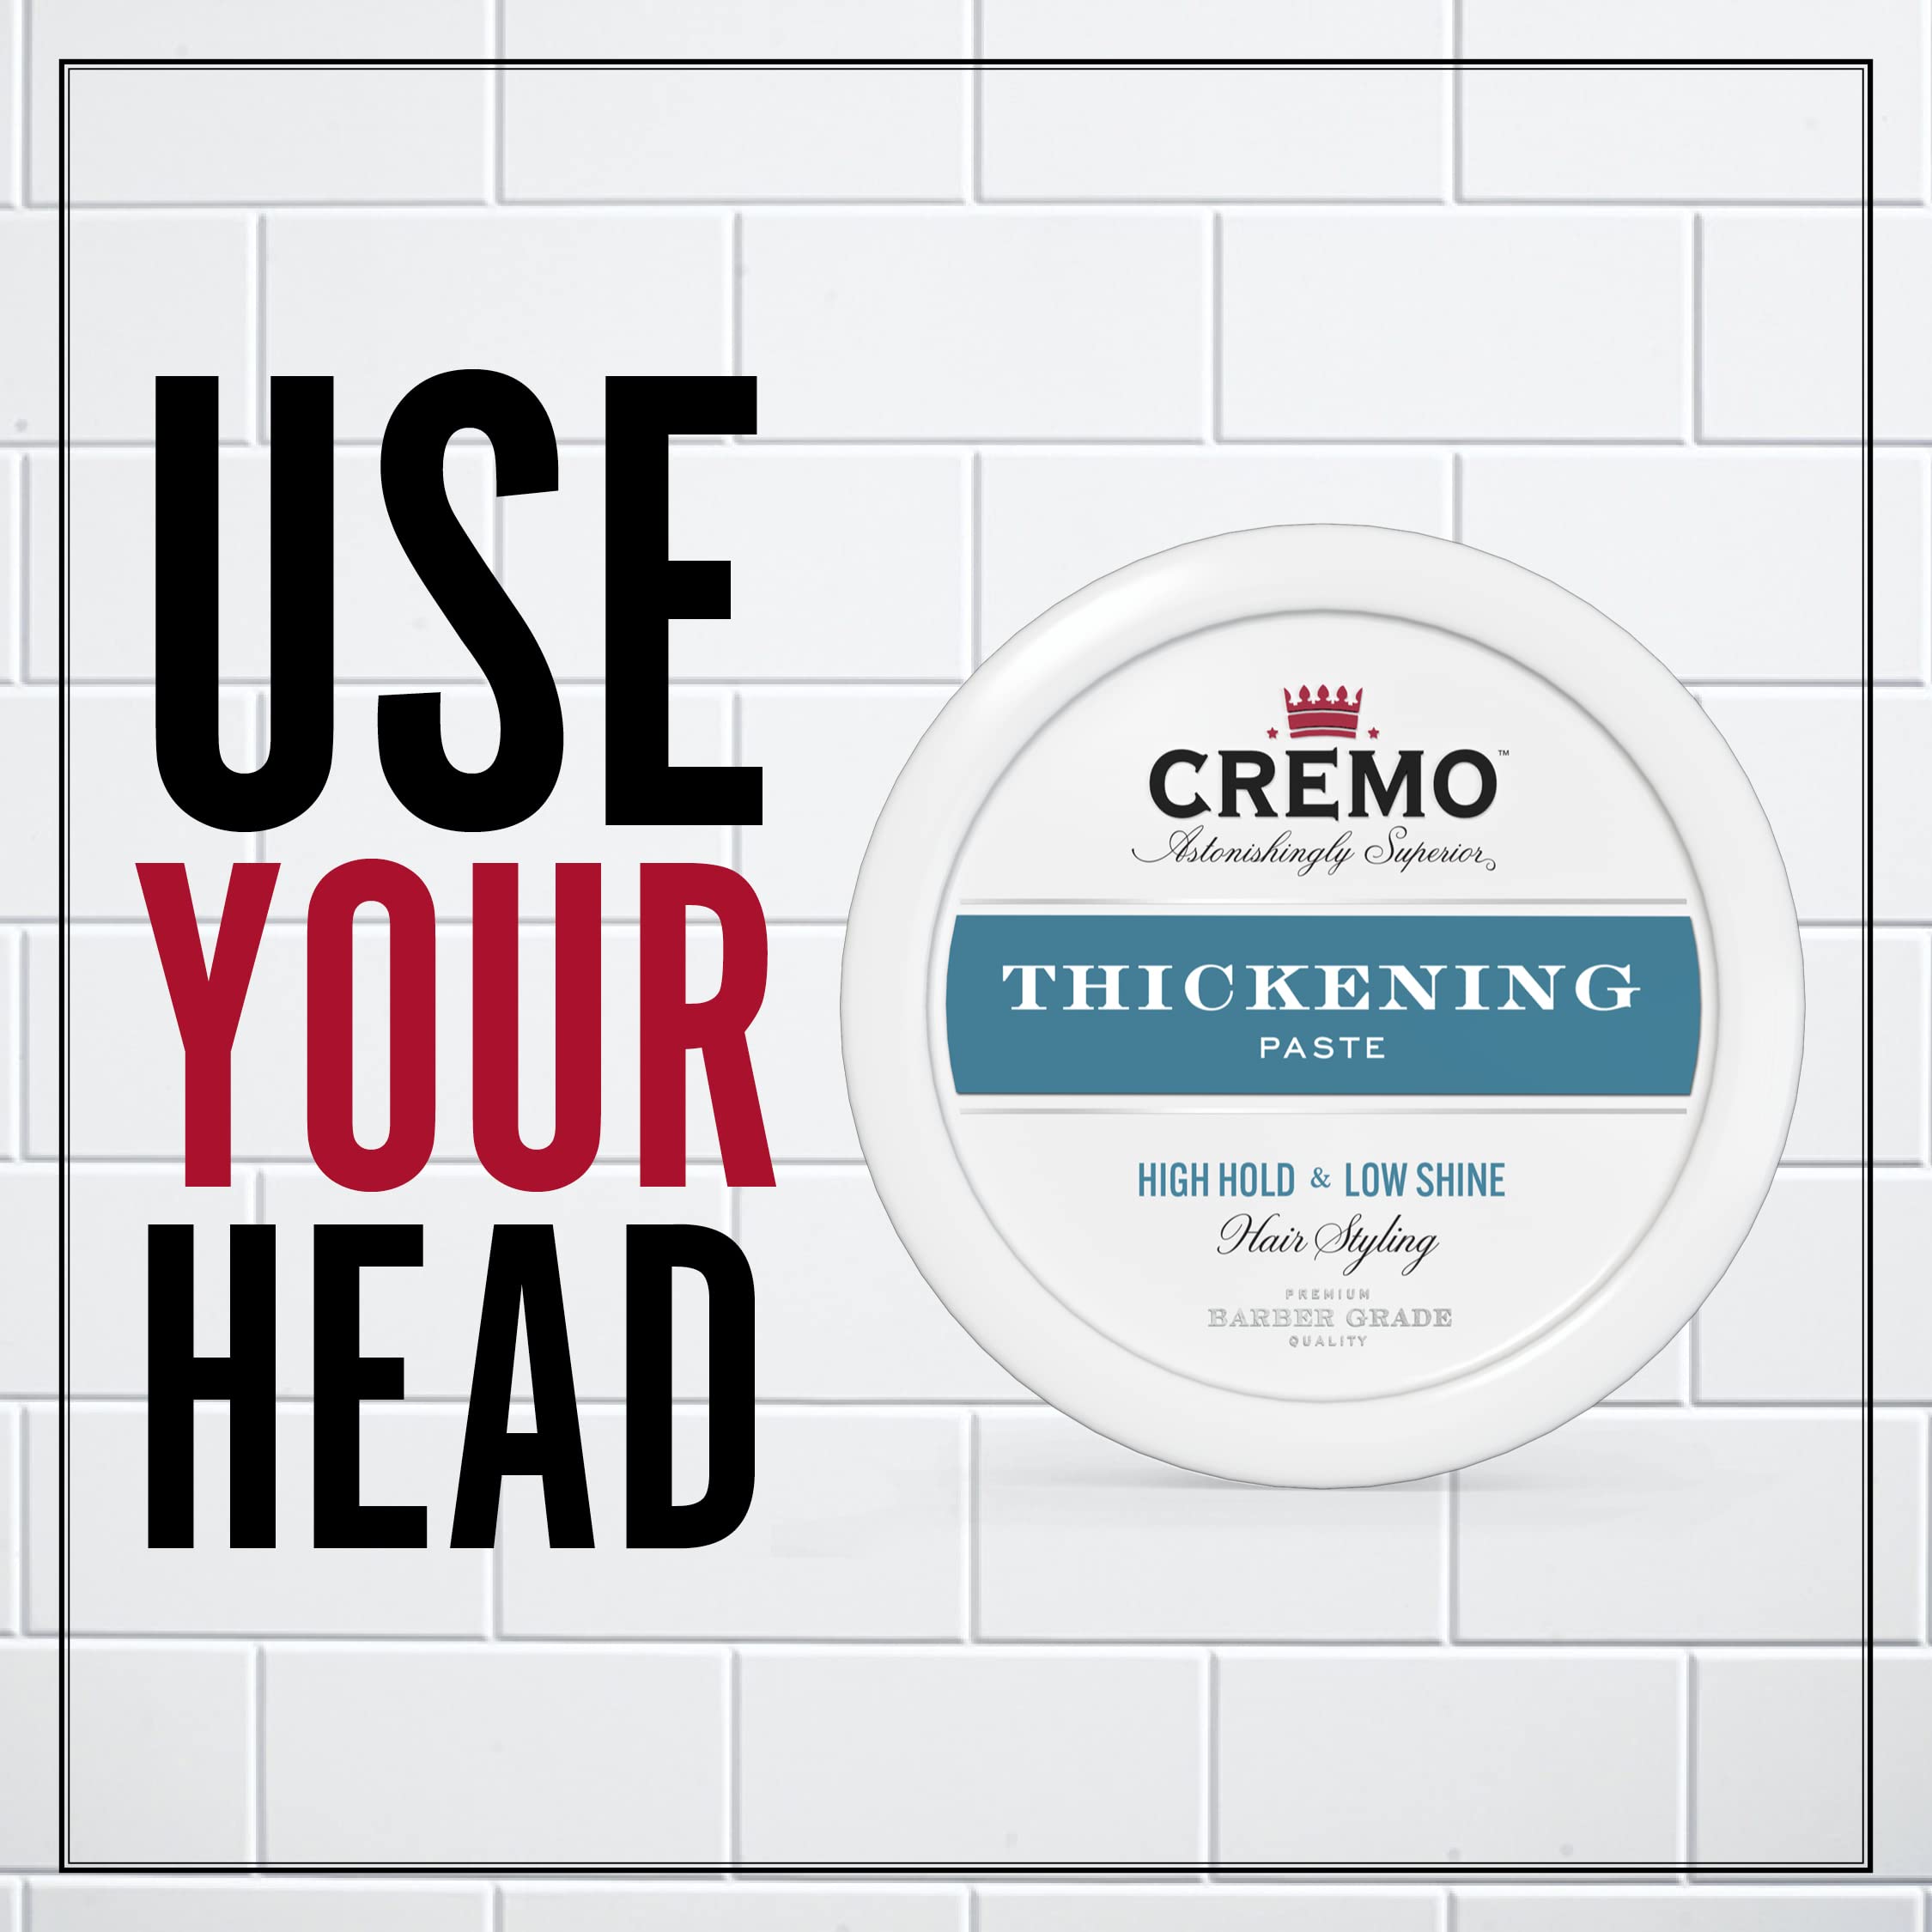 Cremo Premium Barber Grade Hair Styling Thickening Paste, High Hold, Low Shine, 4 Oz